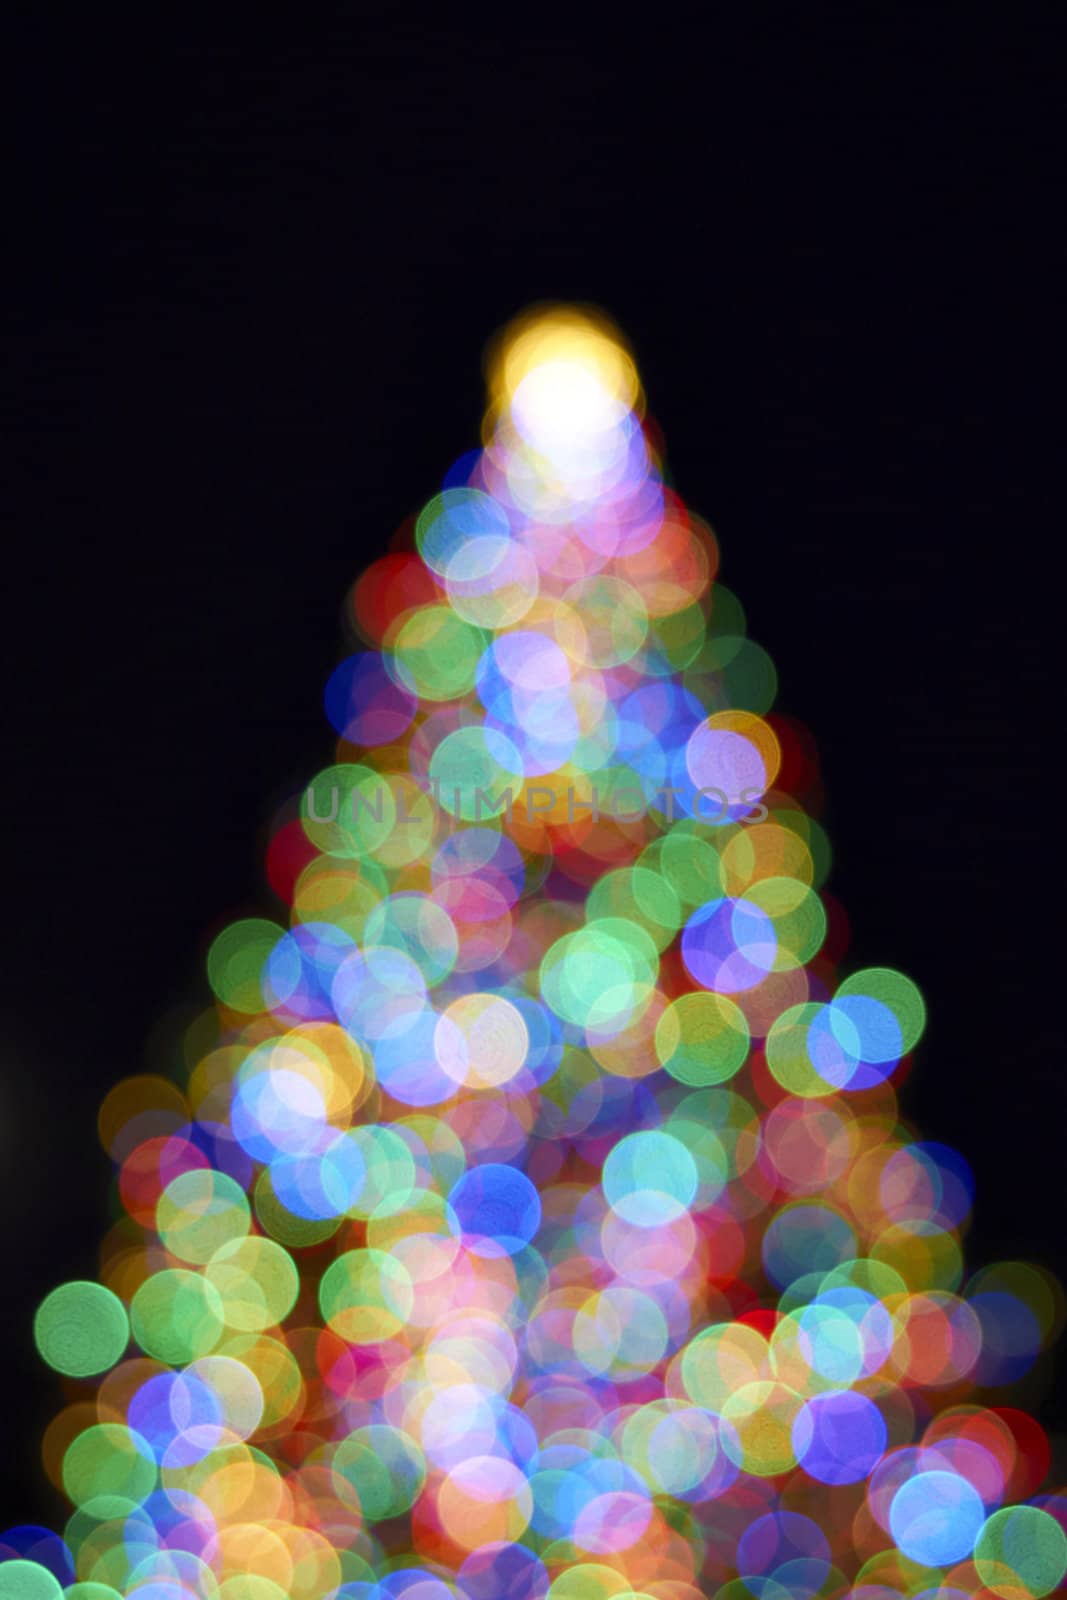 Christmas Tree with Colorful Out of Focus Blurred Light on Black Background